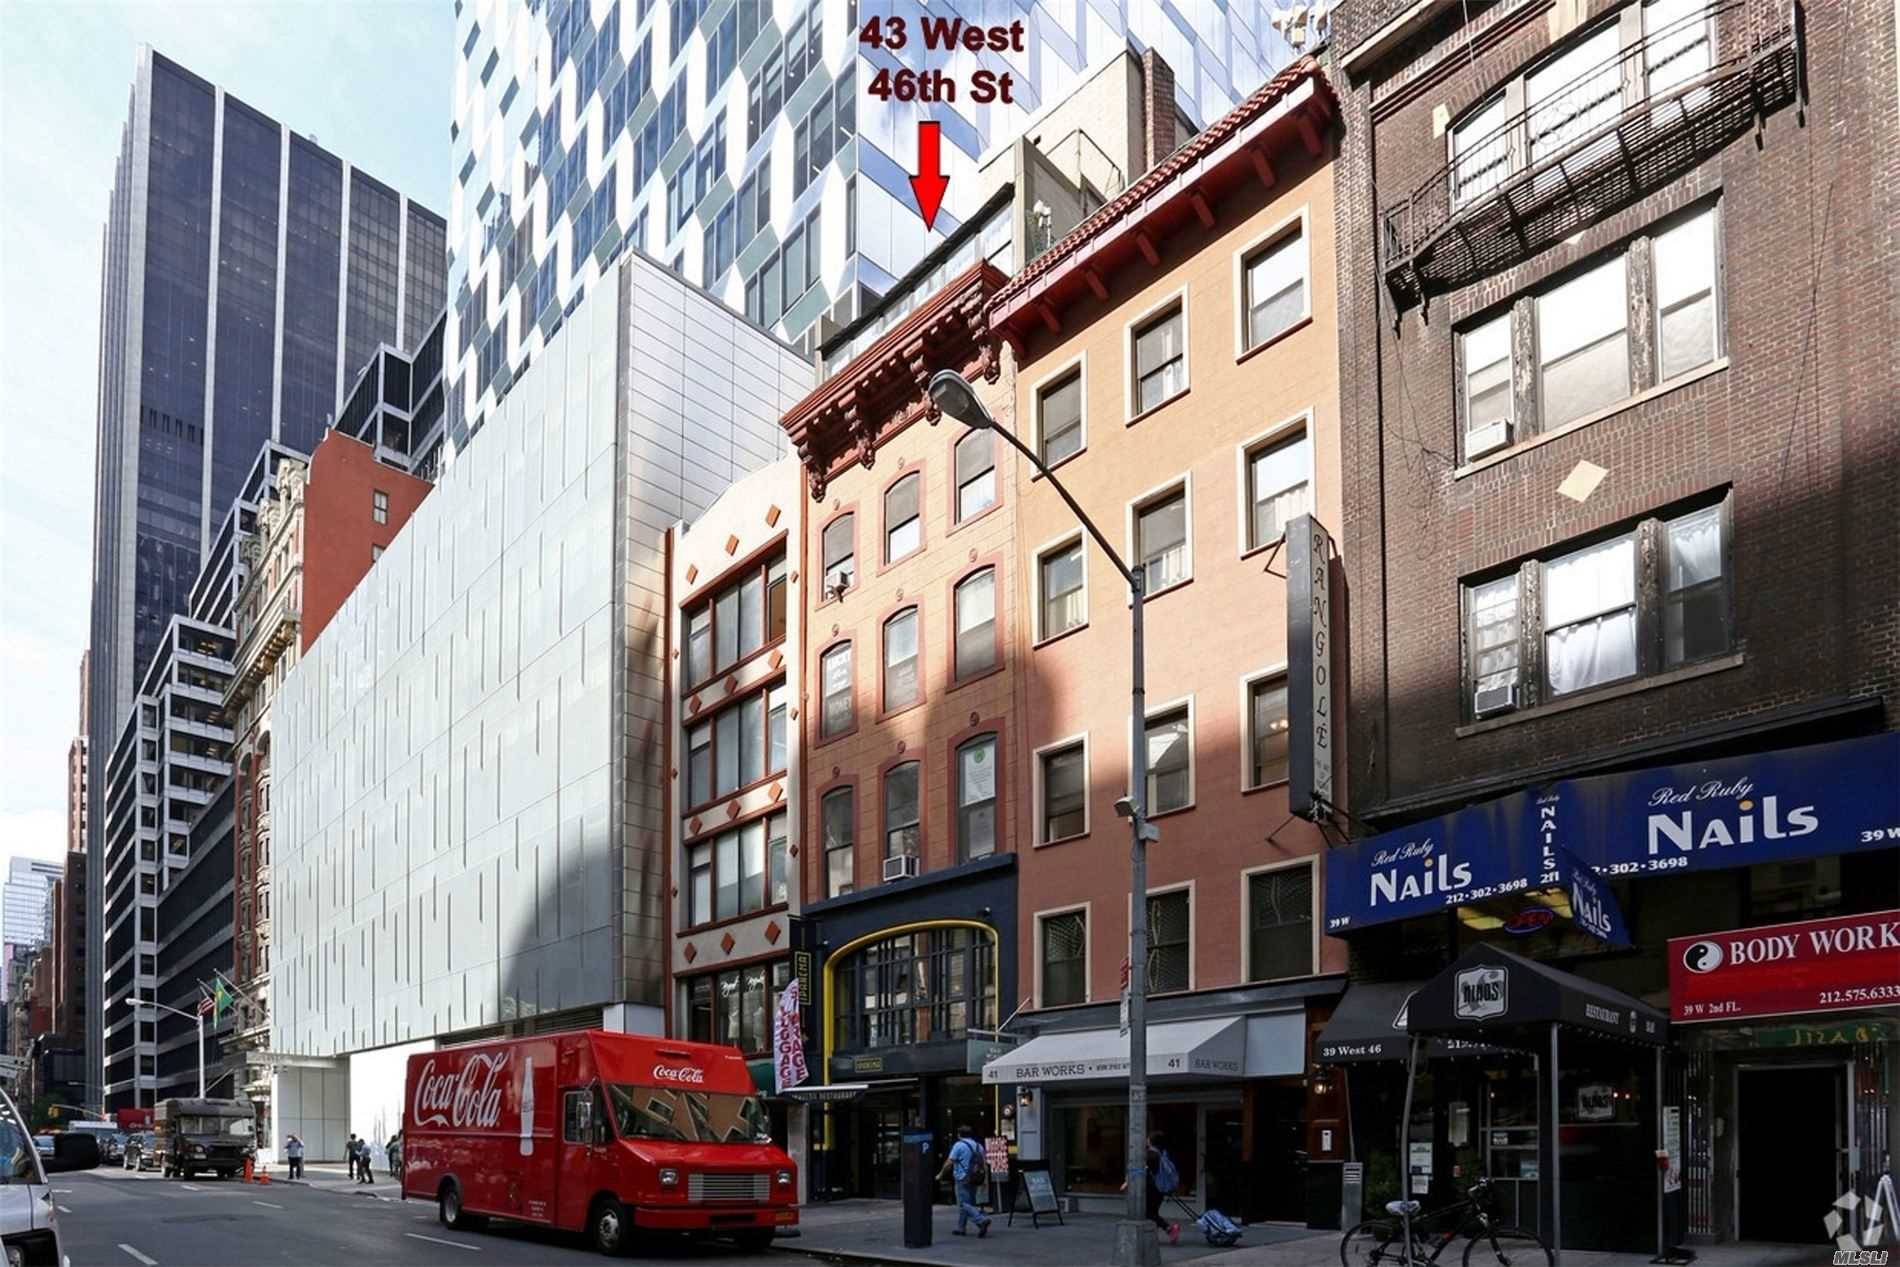 6 story prime location NYC Midtown elevator Office Building with a 3, 500 SF restaurant occupying 1st Fl, 2nd Fl, plus basement 5 yr lease remaining.